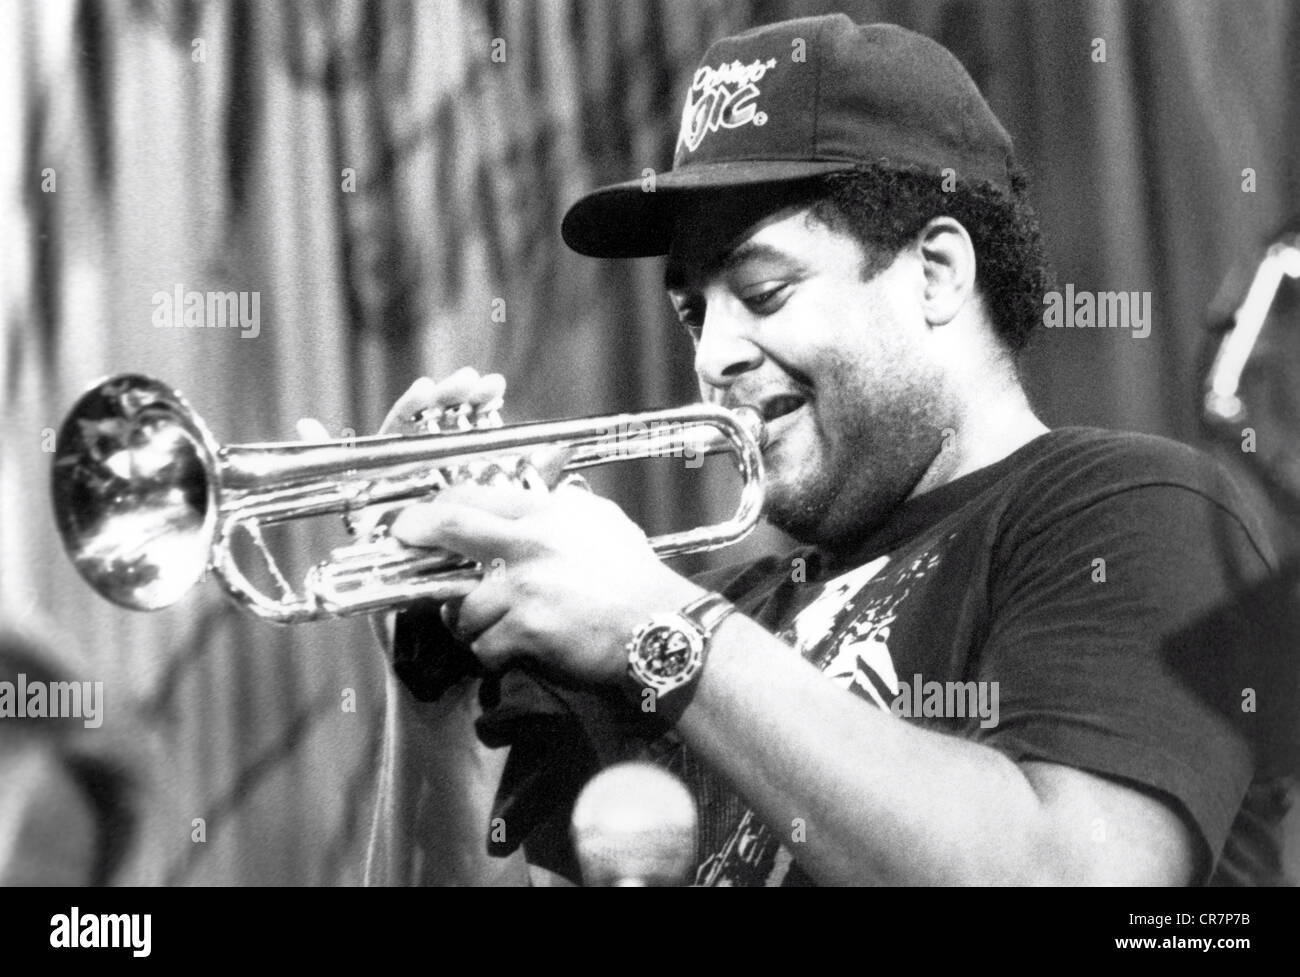 Faddis, Jon, * 24.7.1953, American musician (jazz trumpeter), half length, on stage, Jazz Festival, Montreux, 11.7.1994, 20th century, music, jazz musician, instrument, instruments, musical instrument, instrument, musical instruments, instruments, trumpet, trump, trumpets, trumpeter, trumpeters, make music, play music, making music, playing music, makes music, plays music, made music, played music, playing, play, cap, caps, baseball cap, , Stock Photo